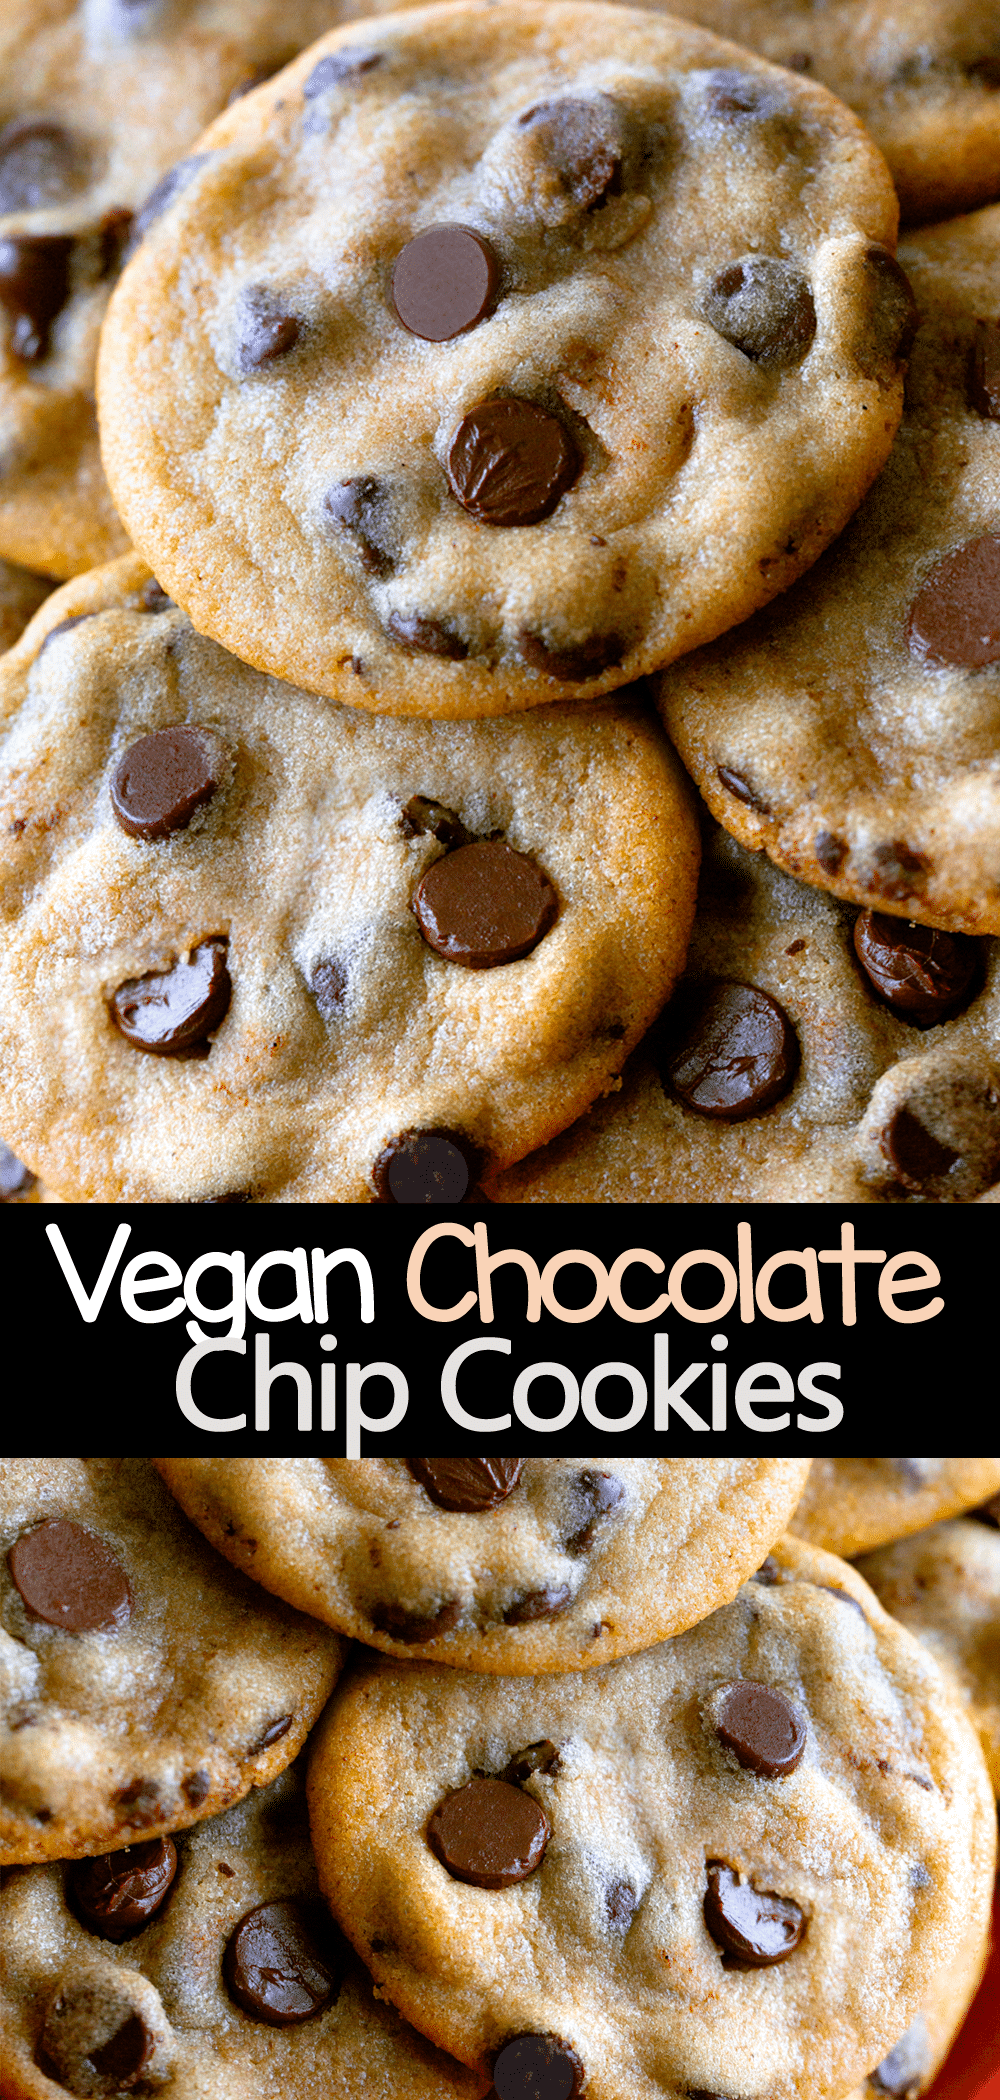 https://chocolatecoveredkatie.com/wp-content/uploads/2022/01/How-To-Make-Vegan-Chocolate-Chip-Cookies-No-Eggs-No-Dairy.png